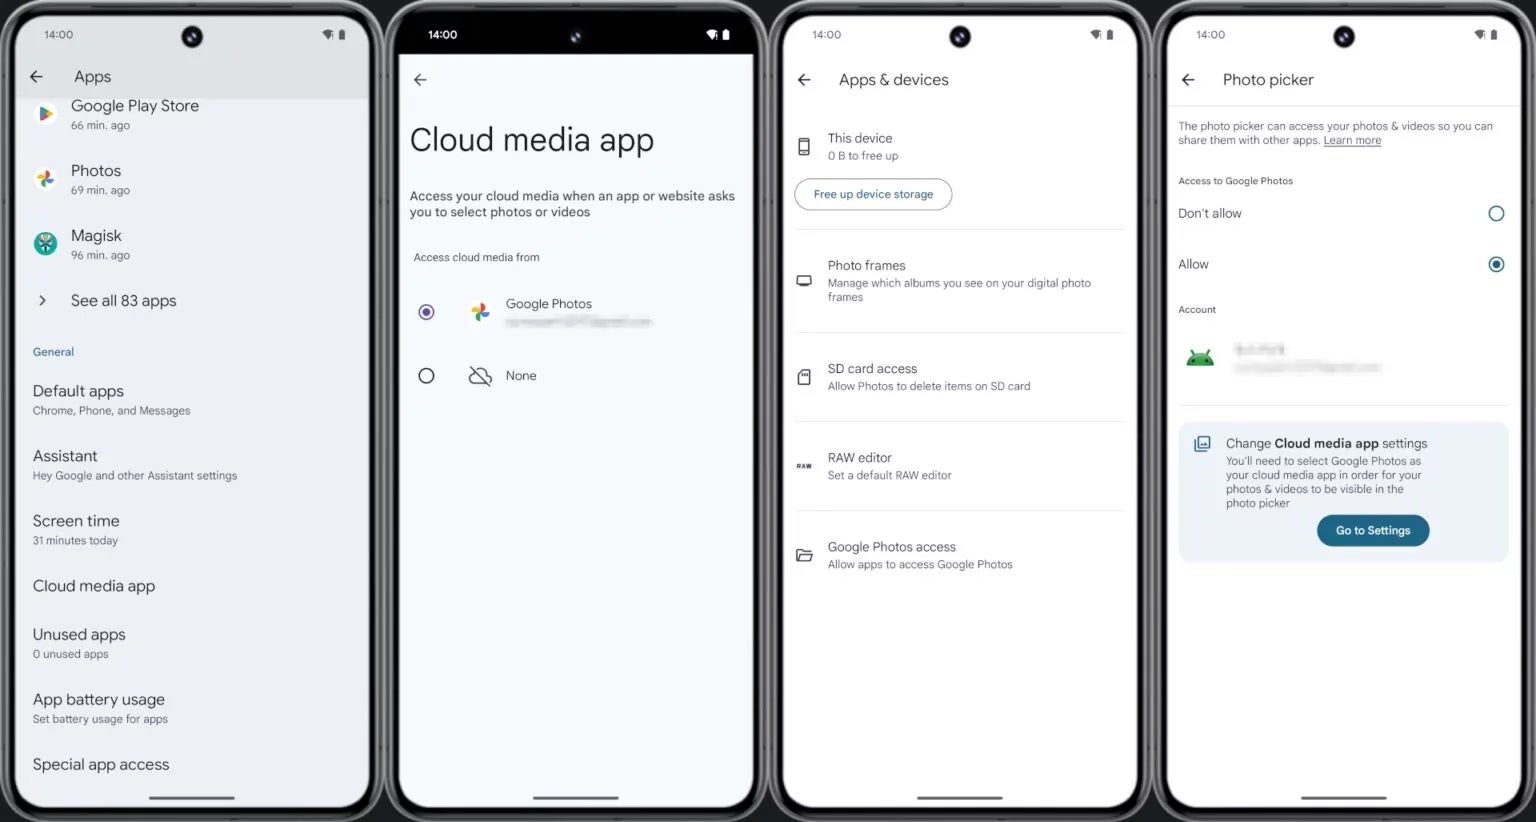 Google Photos set up as the cloud media provider for Android’s Photo Picker | Source - Android Authority - Google Photos media could soon be accessible via Android's new Photo Picker